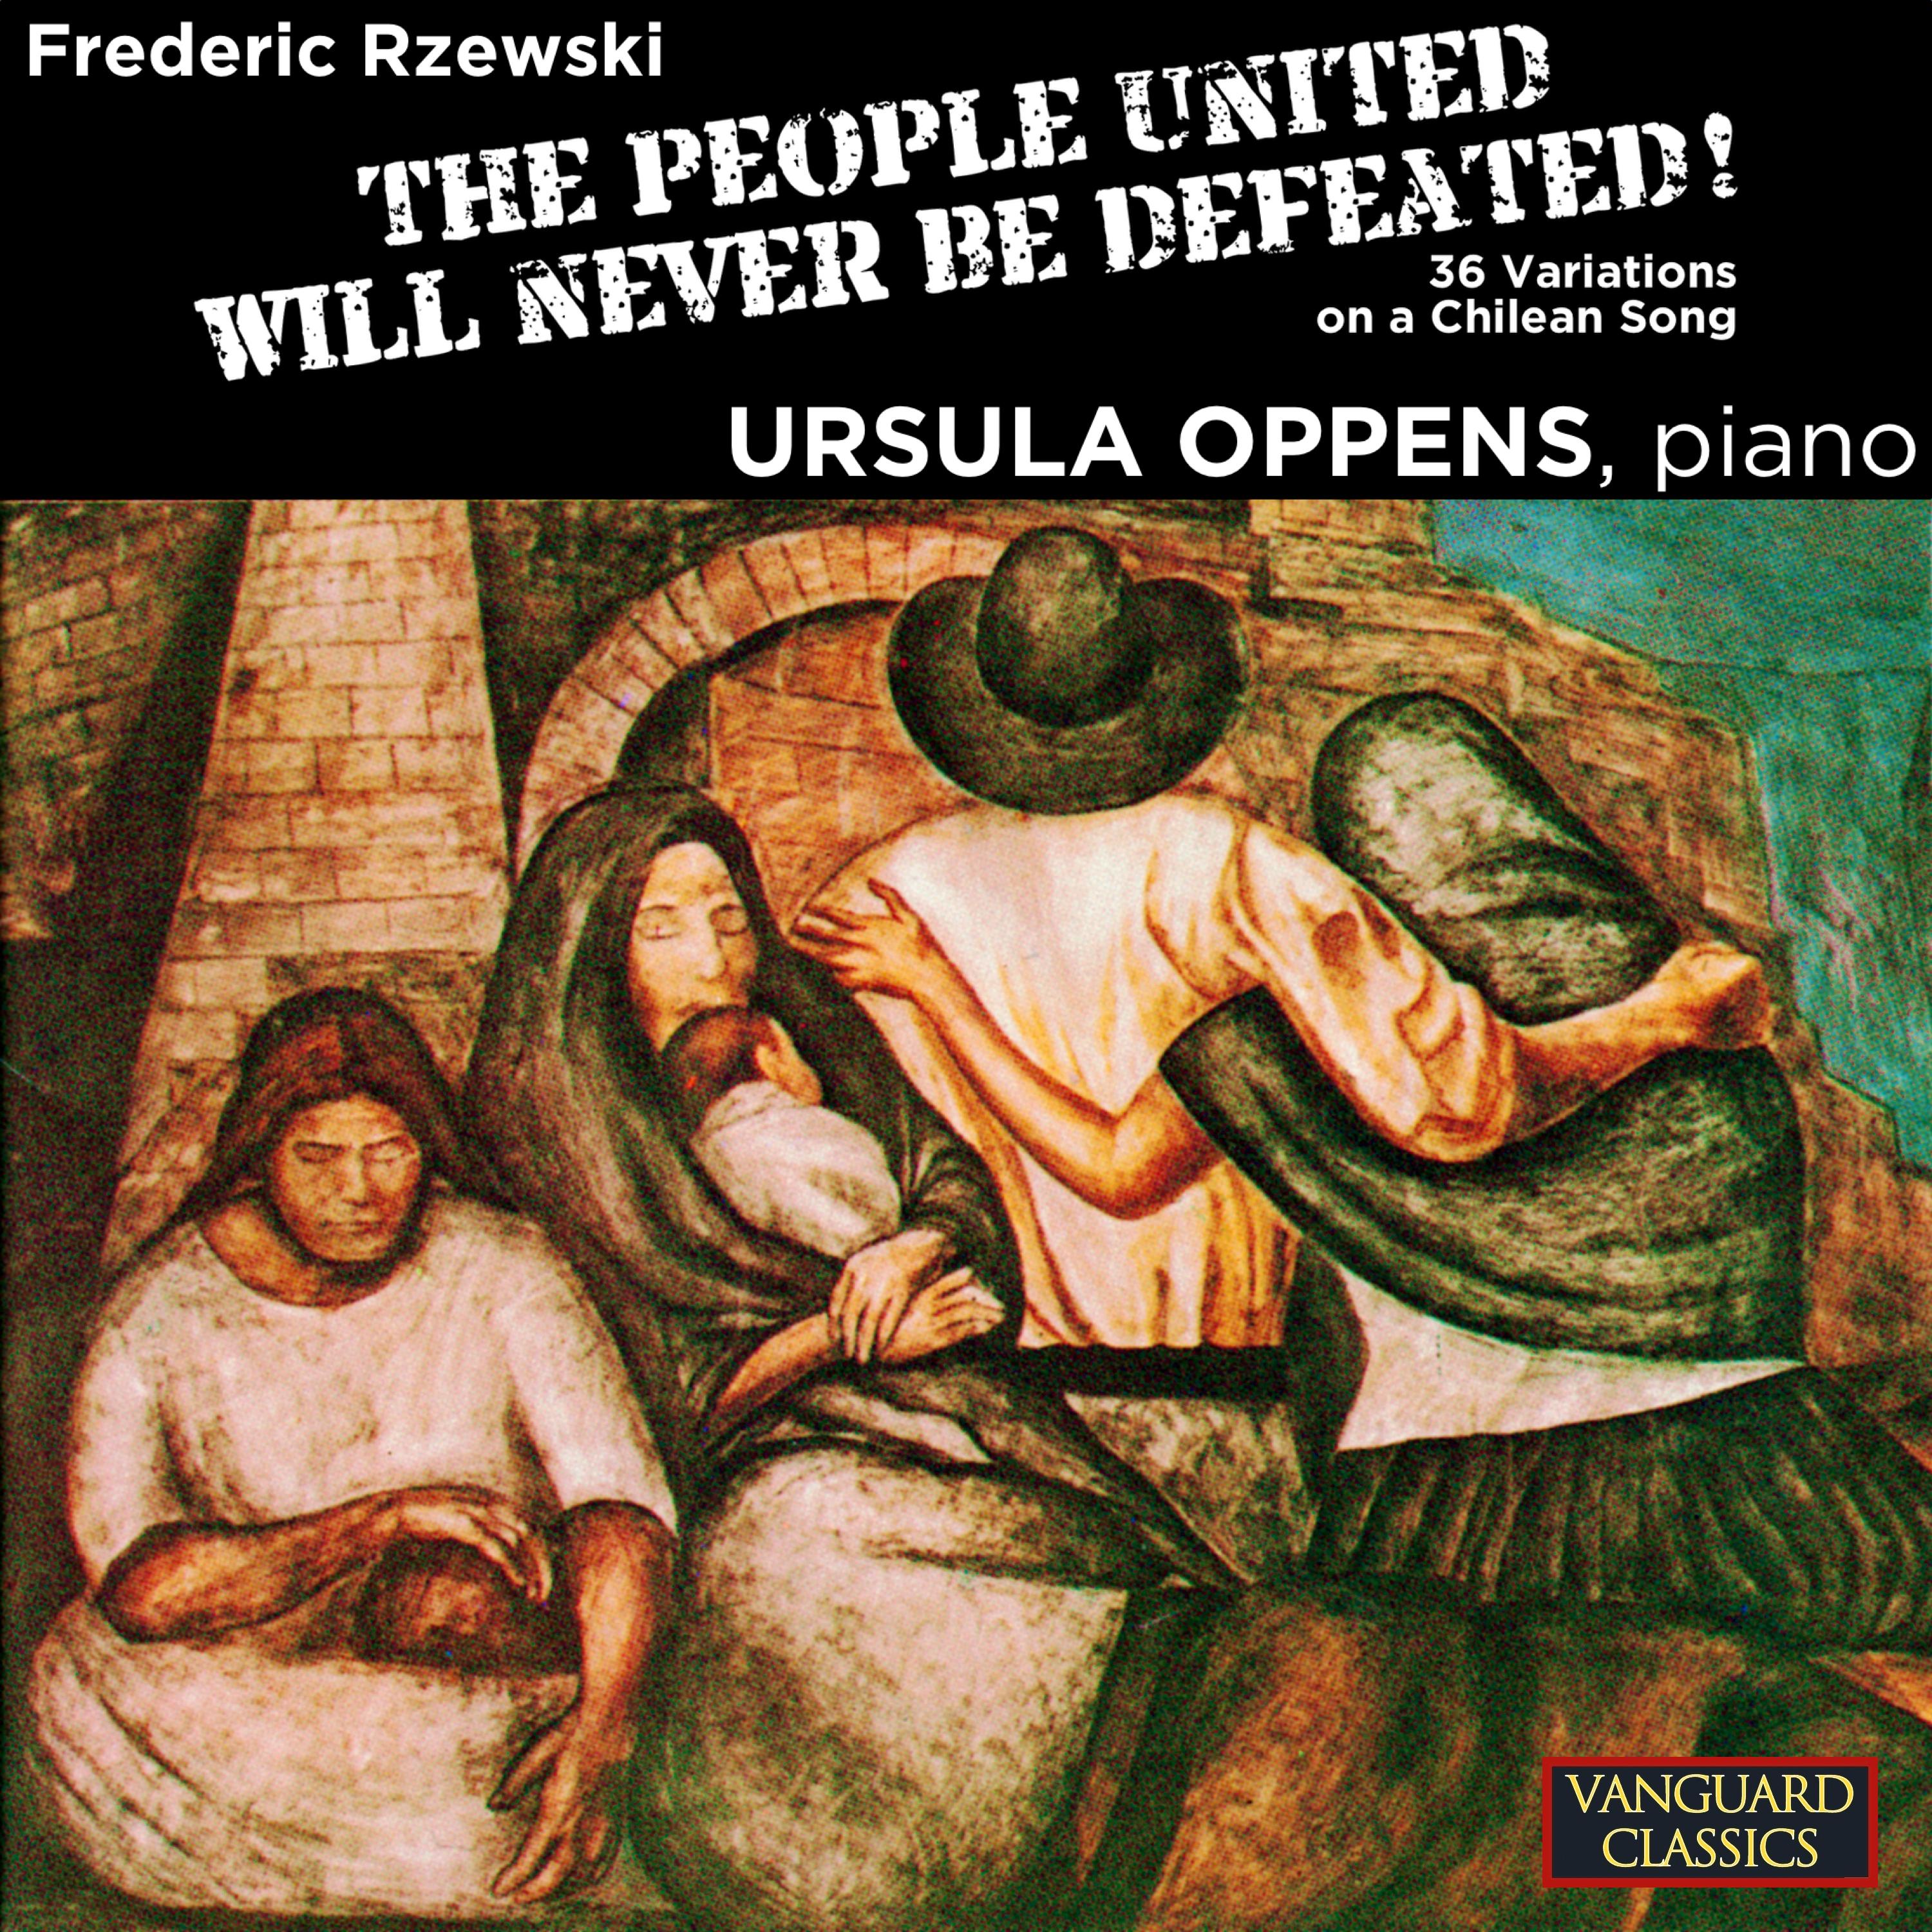 Ursula Oppens - The People United Will Never Be Defeated!:Variation 2. With firmness